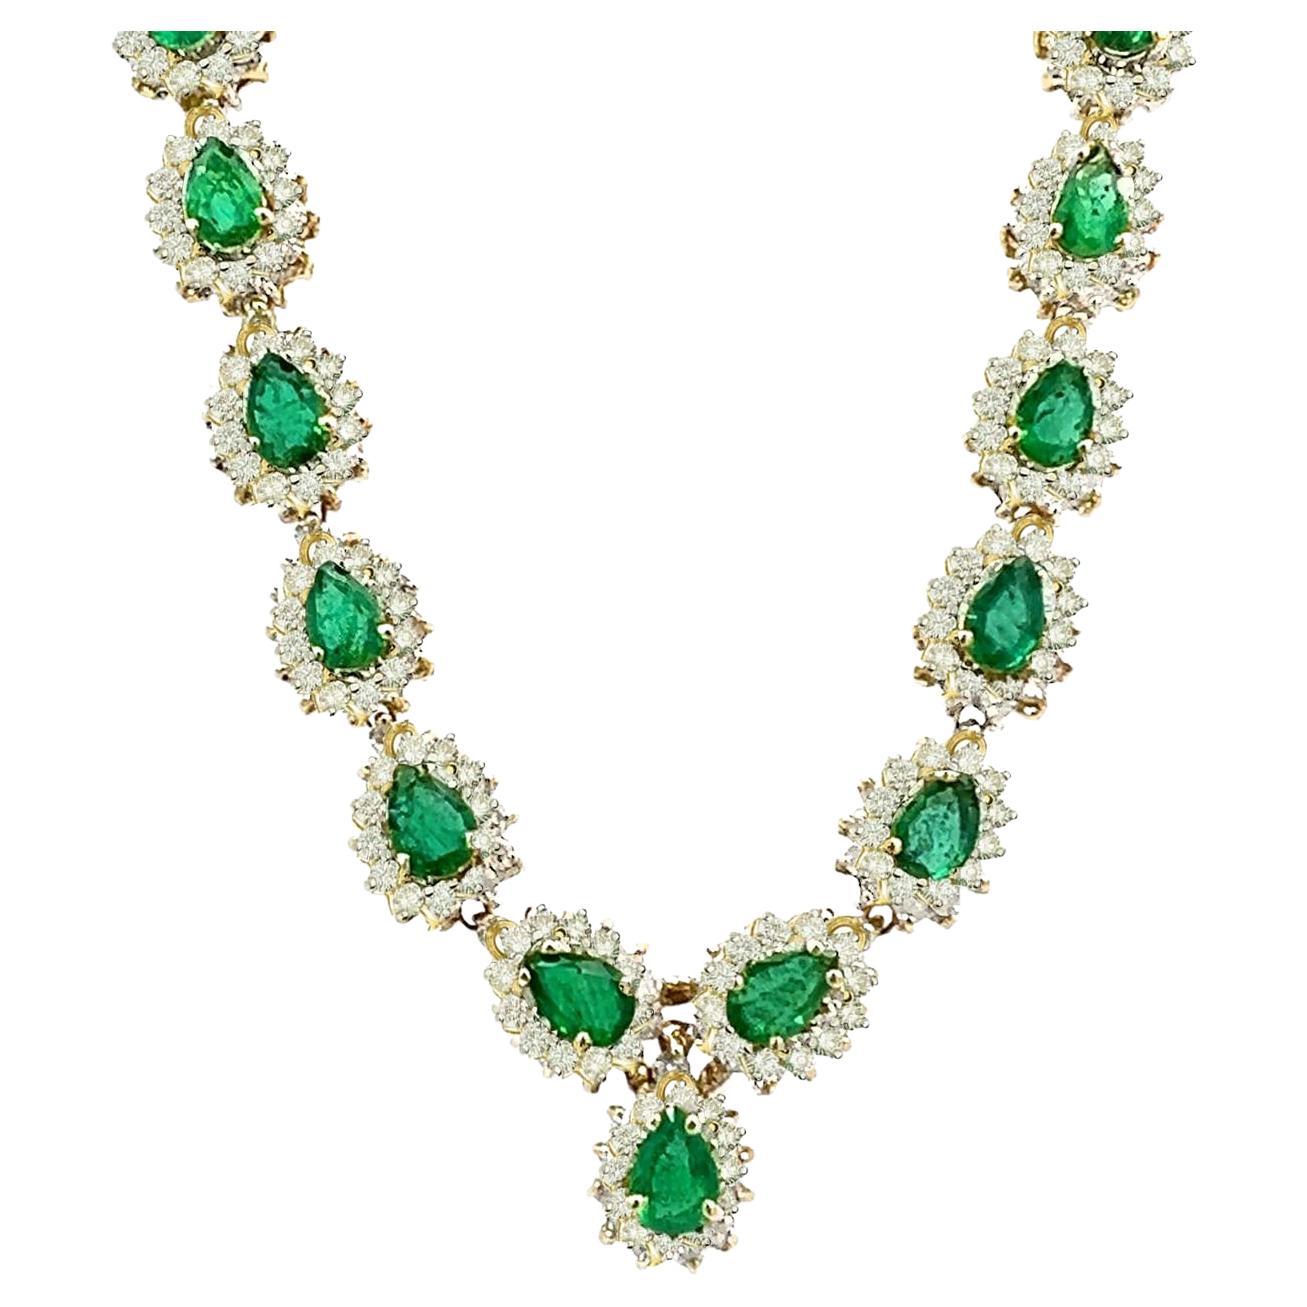 14 karat yellow gold Pear shape emerald with round brilliant white diamond halo tennis link necklace.
Crafted with precision and care, this necklace boasts a stunning arrangement of 41 pear-shaped emeralds, totaling approximately 10.50 carats,